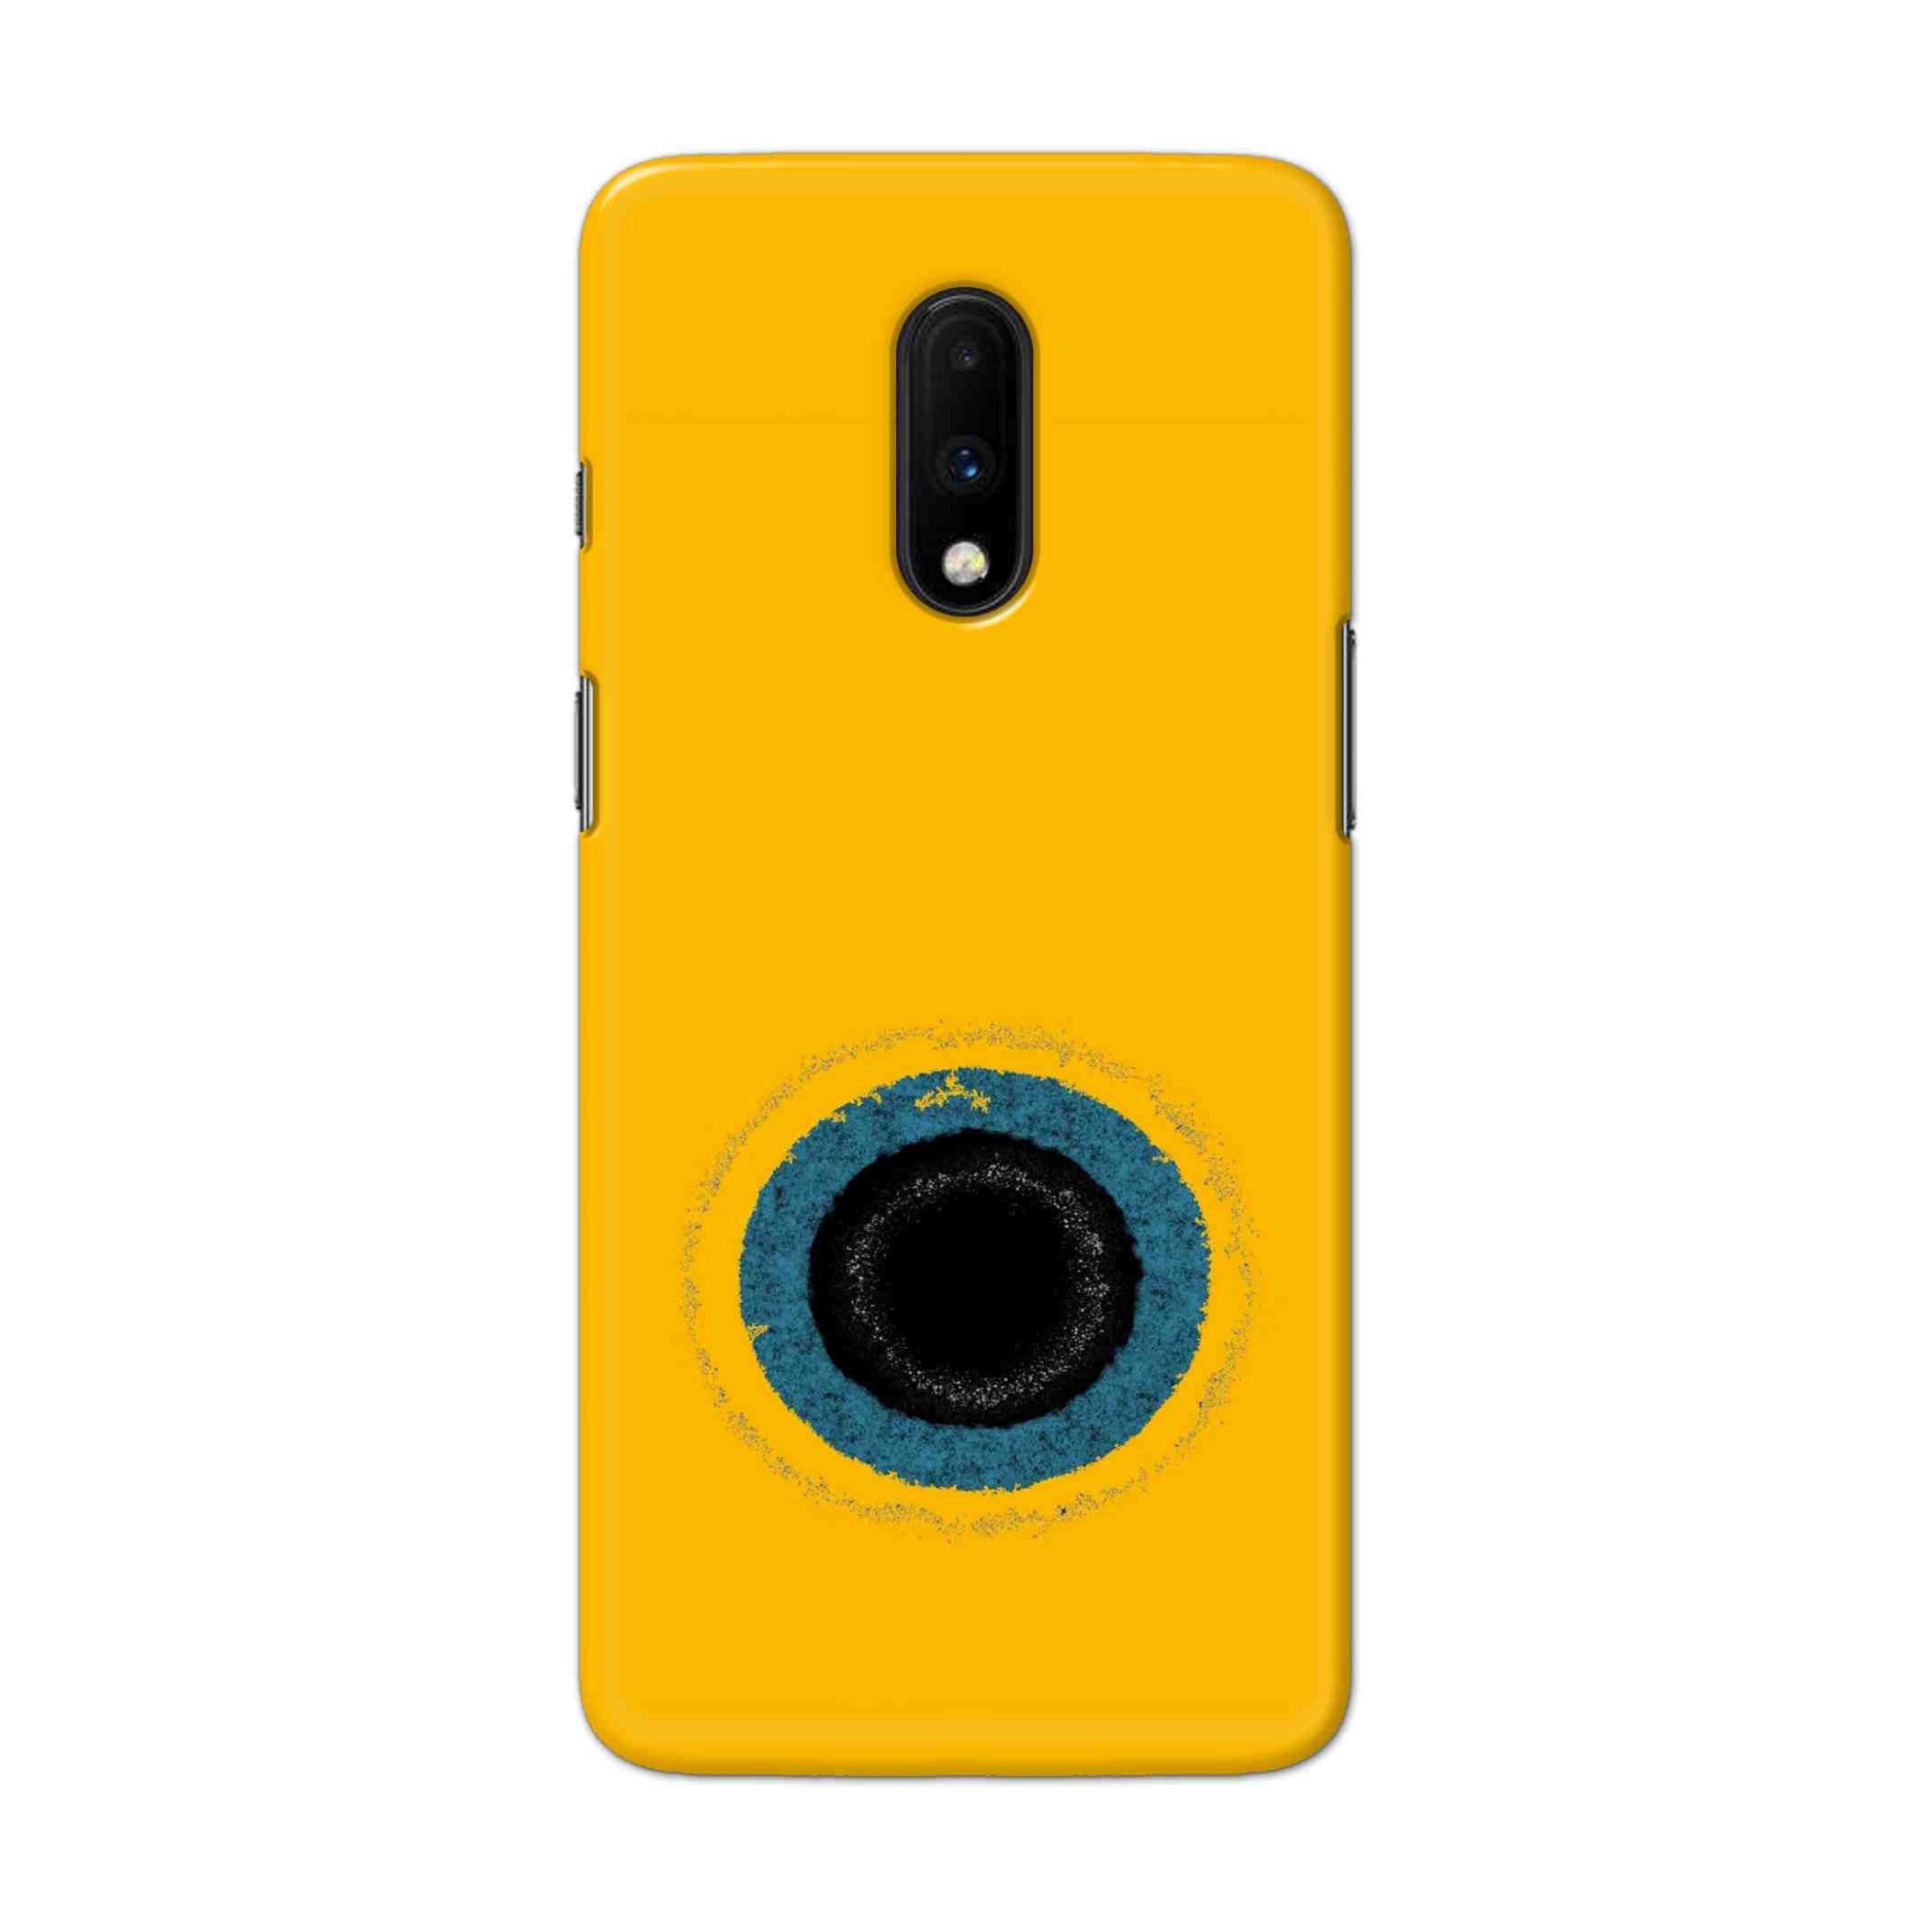 Buy Dark Hole With Yellow Background Hard Back Mobile Phone Case Cover For OnePlus 7 Online